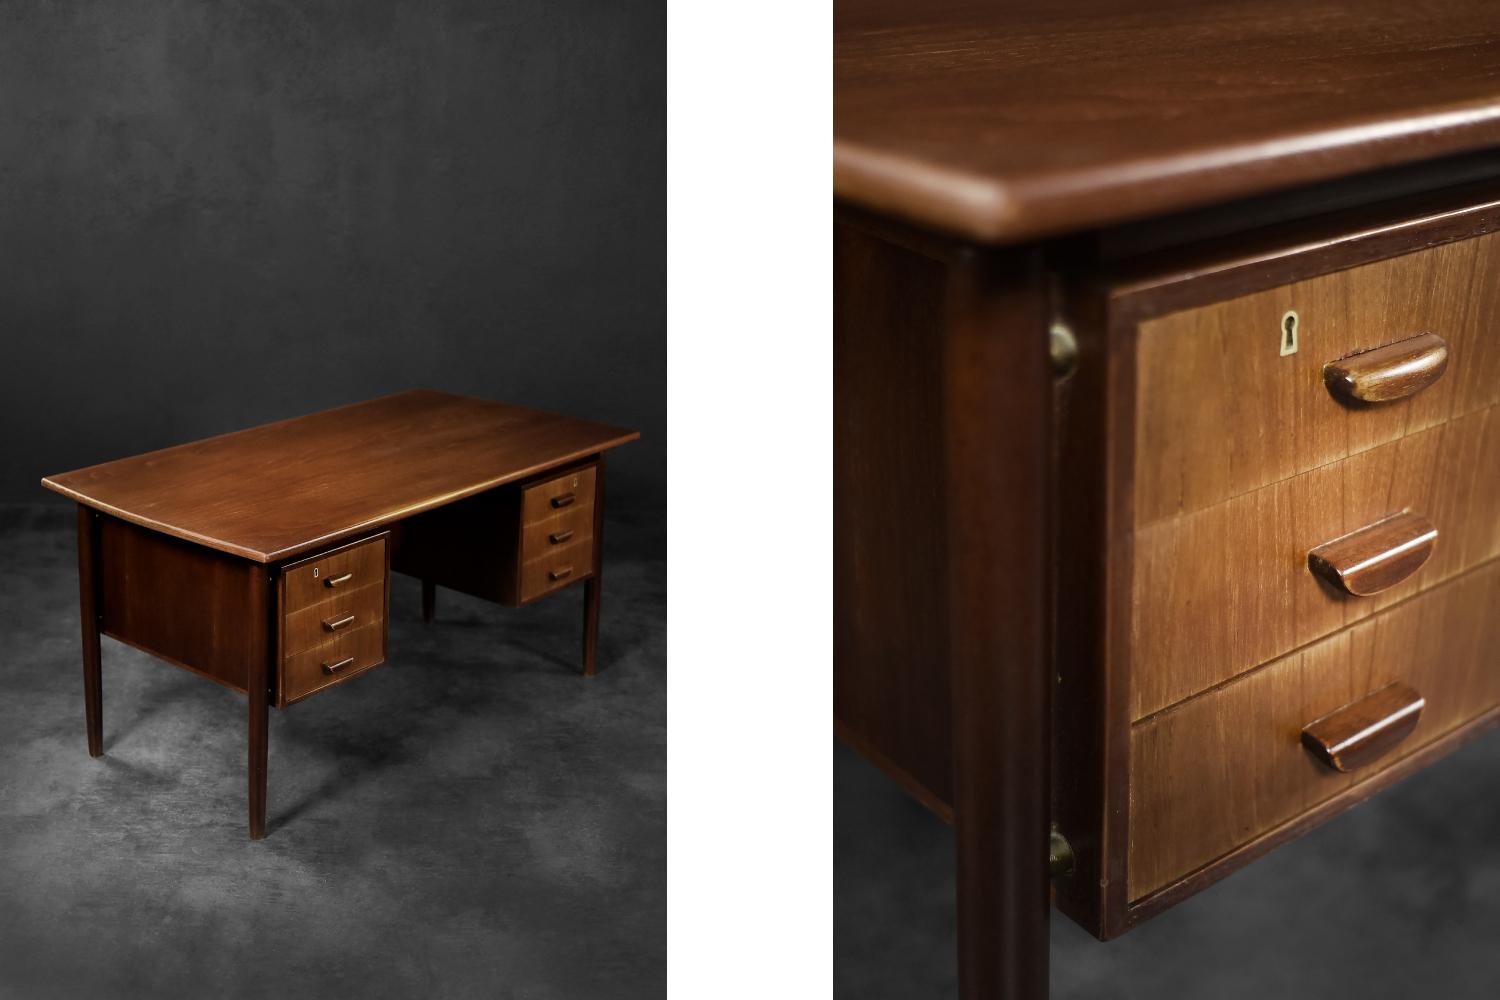 This large, bilateral desk was made in Denmark during the 1960s. It is finished with teak wood in a warm shade of brown. It is a piece of furniture with a balanced design, where style and functionality go hand in hand. The front consist of a block